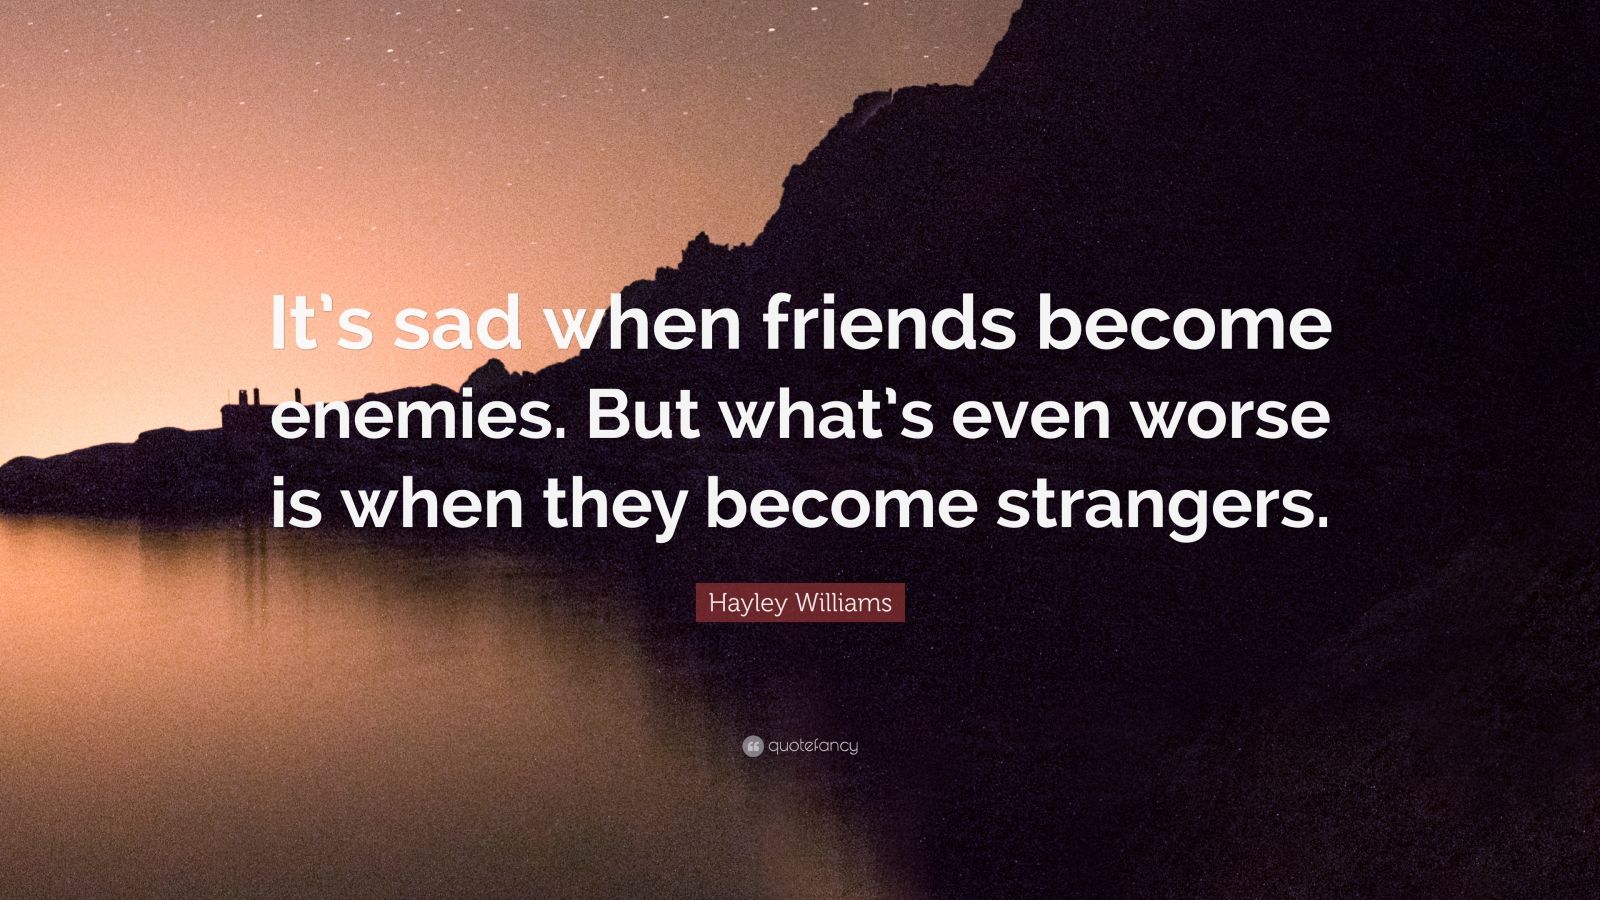 Hayley Williams Quote: “It’s sad when friends become enemies. But what